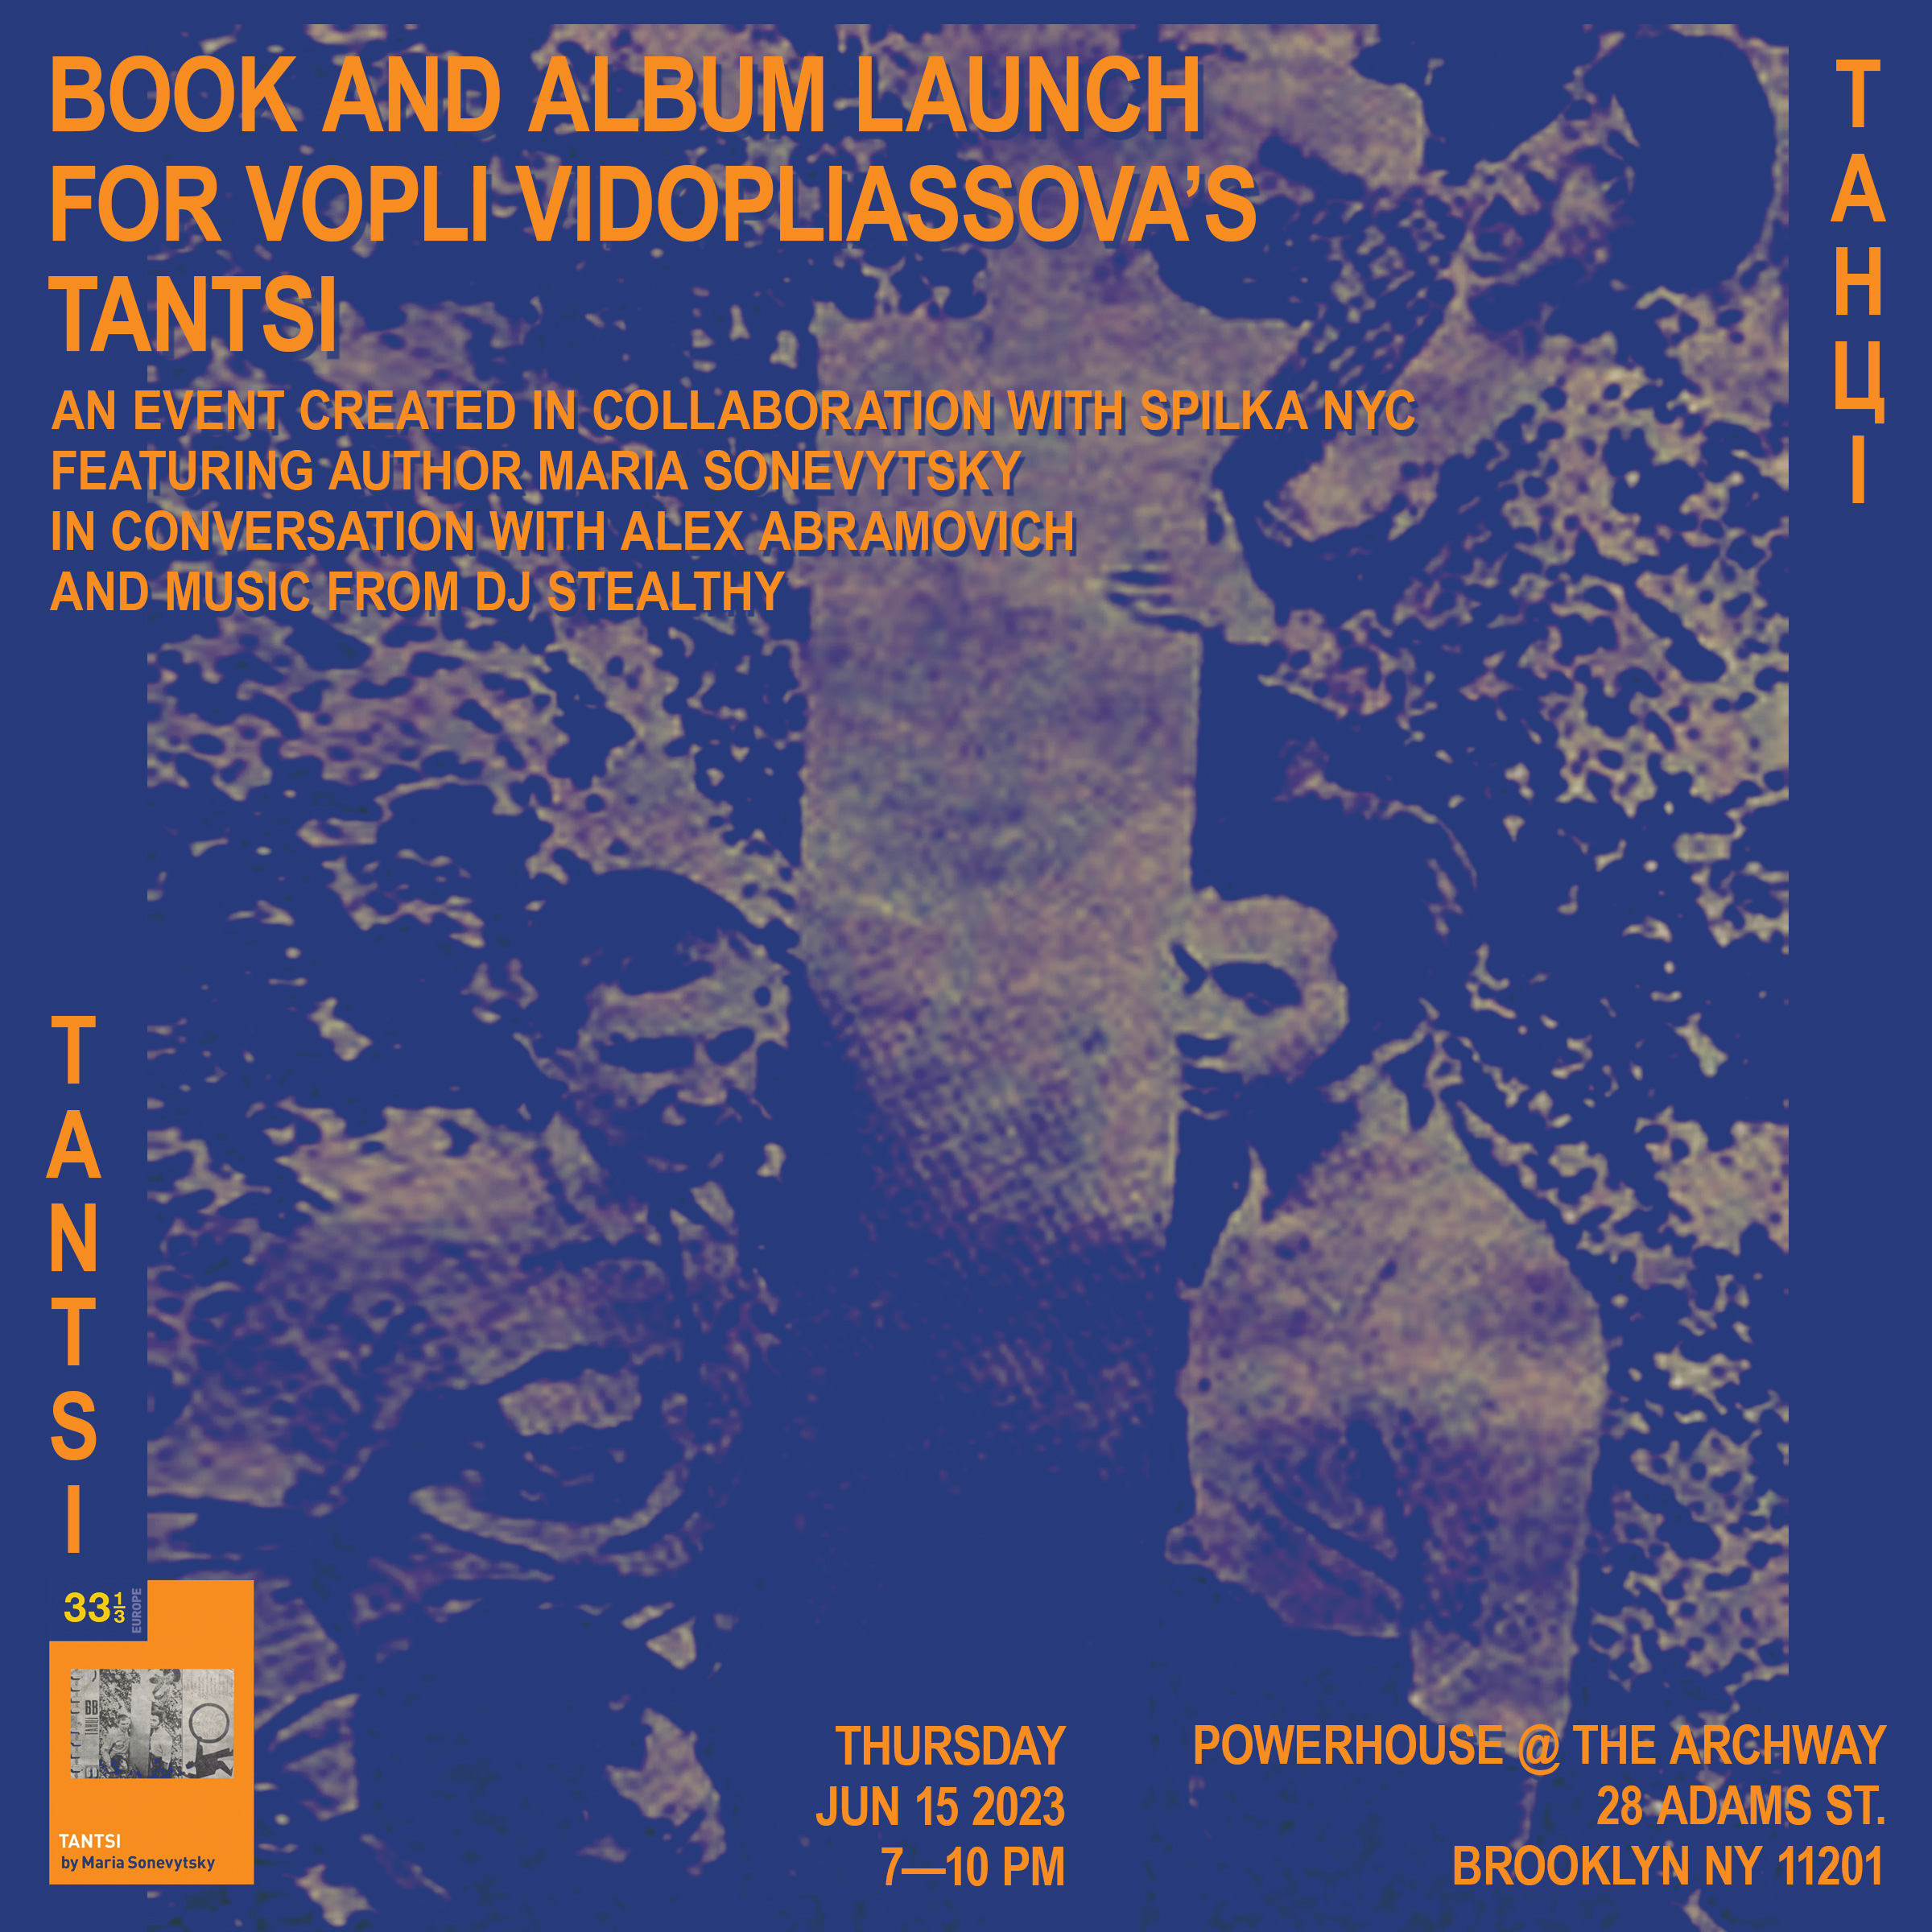 Book and Album Launch in Collaboration with Spilka NYC: Vopli Vidopliassova’s Tantsi by Maria Sonevytsky in conversation with Alex Abramovich, with music from DJ Stealthy